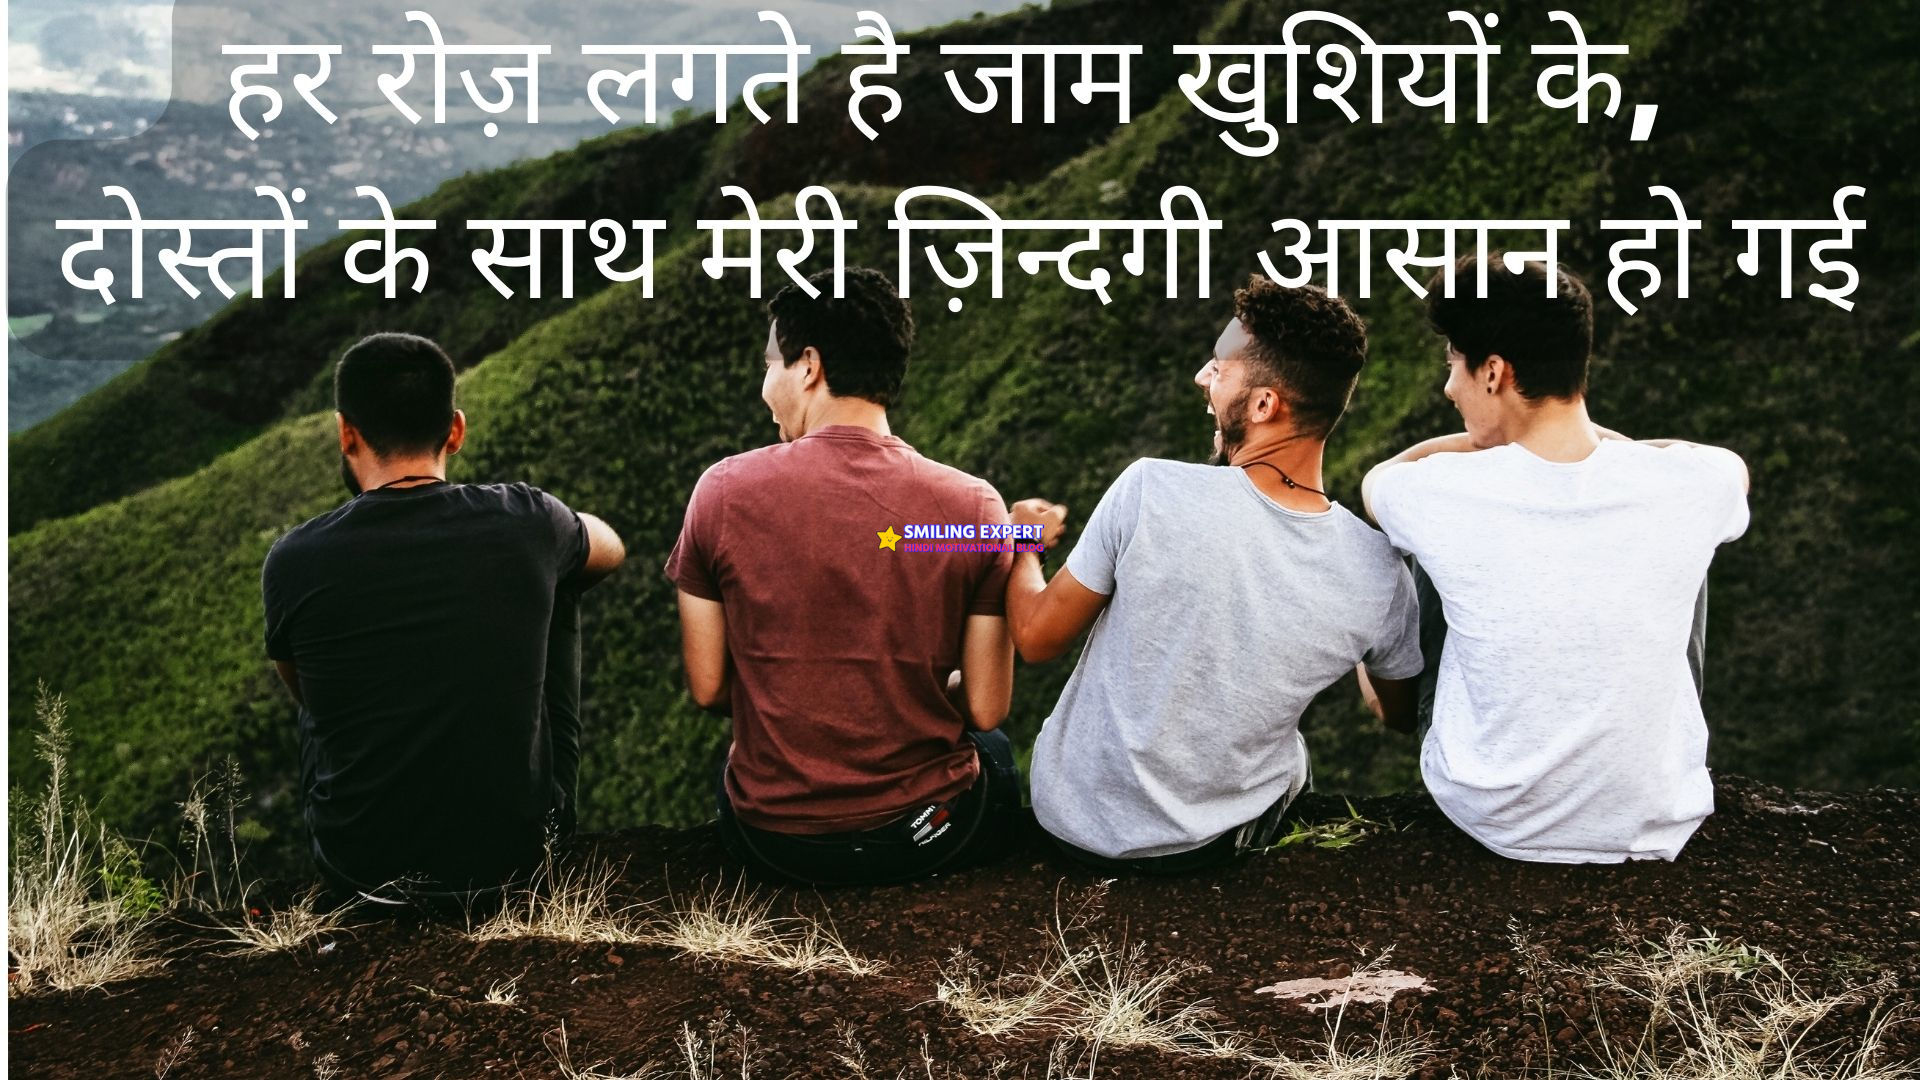 lines on friends in hindi